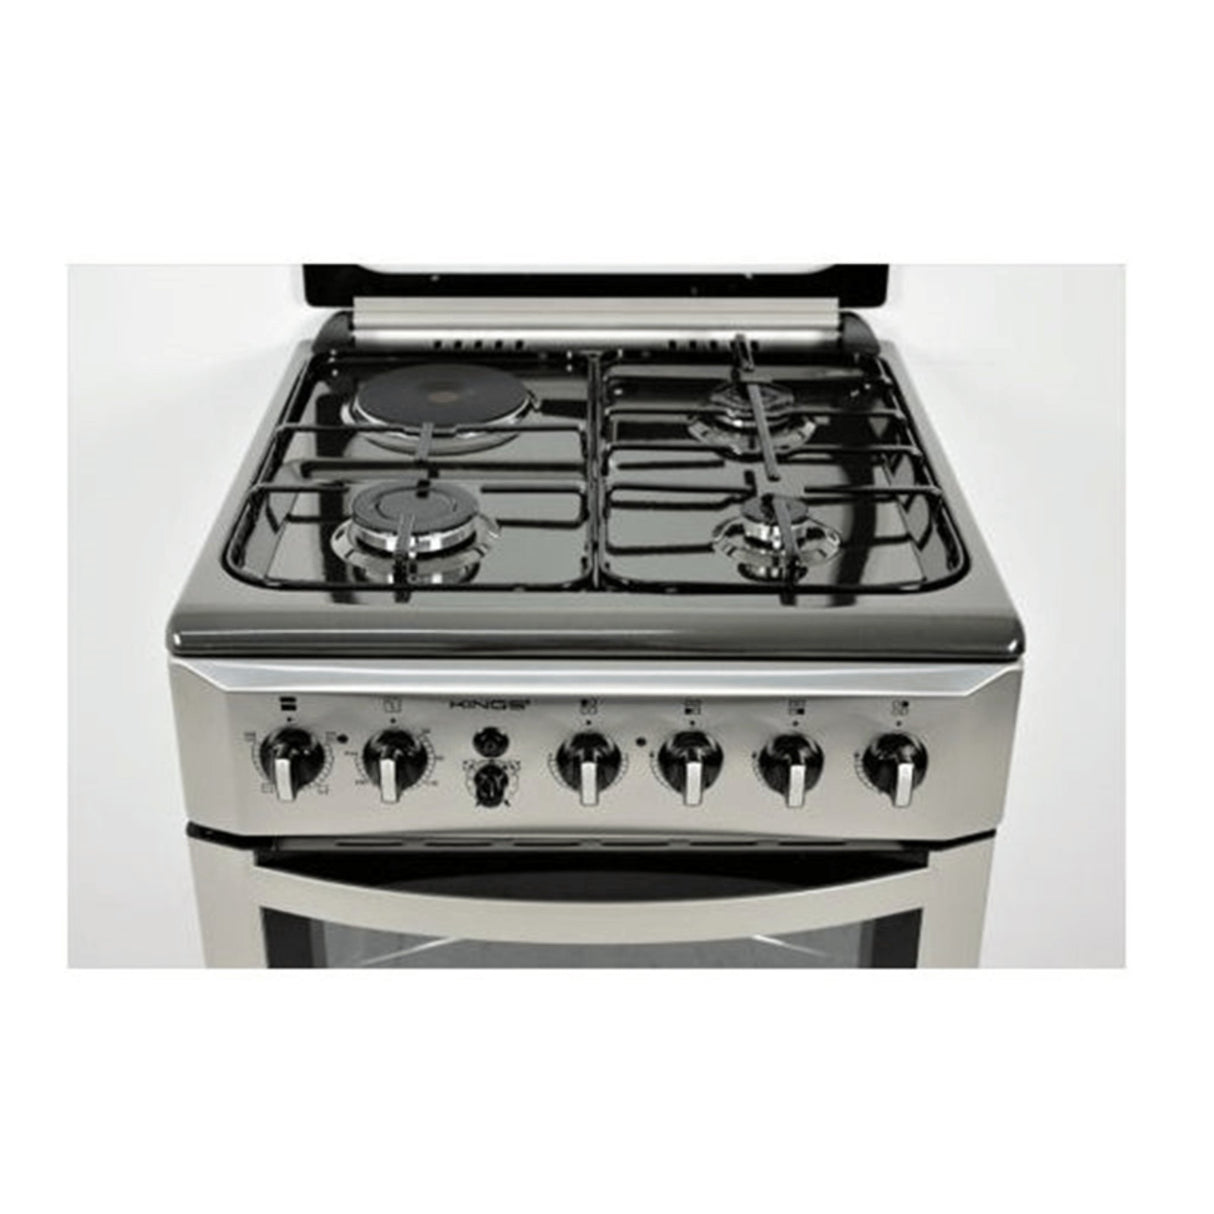 Kings 3Gas + 1 Electric Standing Cooker, KG-6631/1TB, Marble Grey - KWT Tech Mart